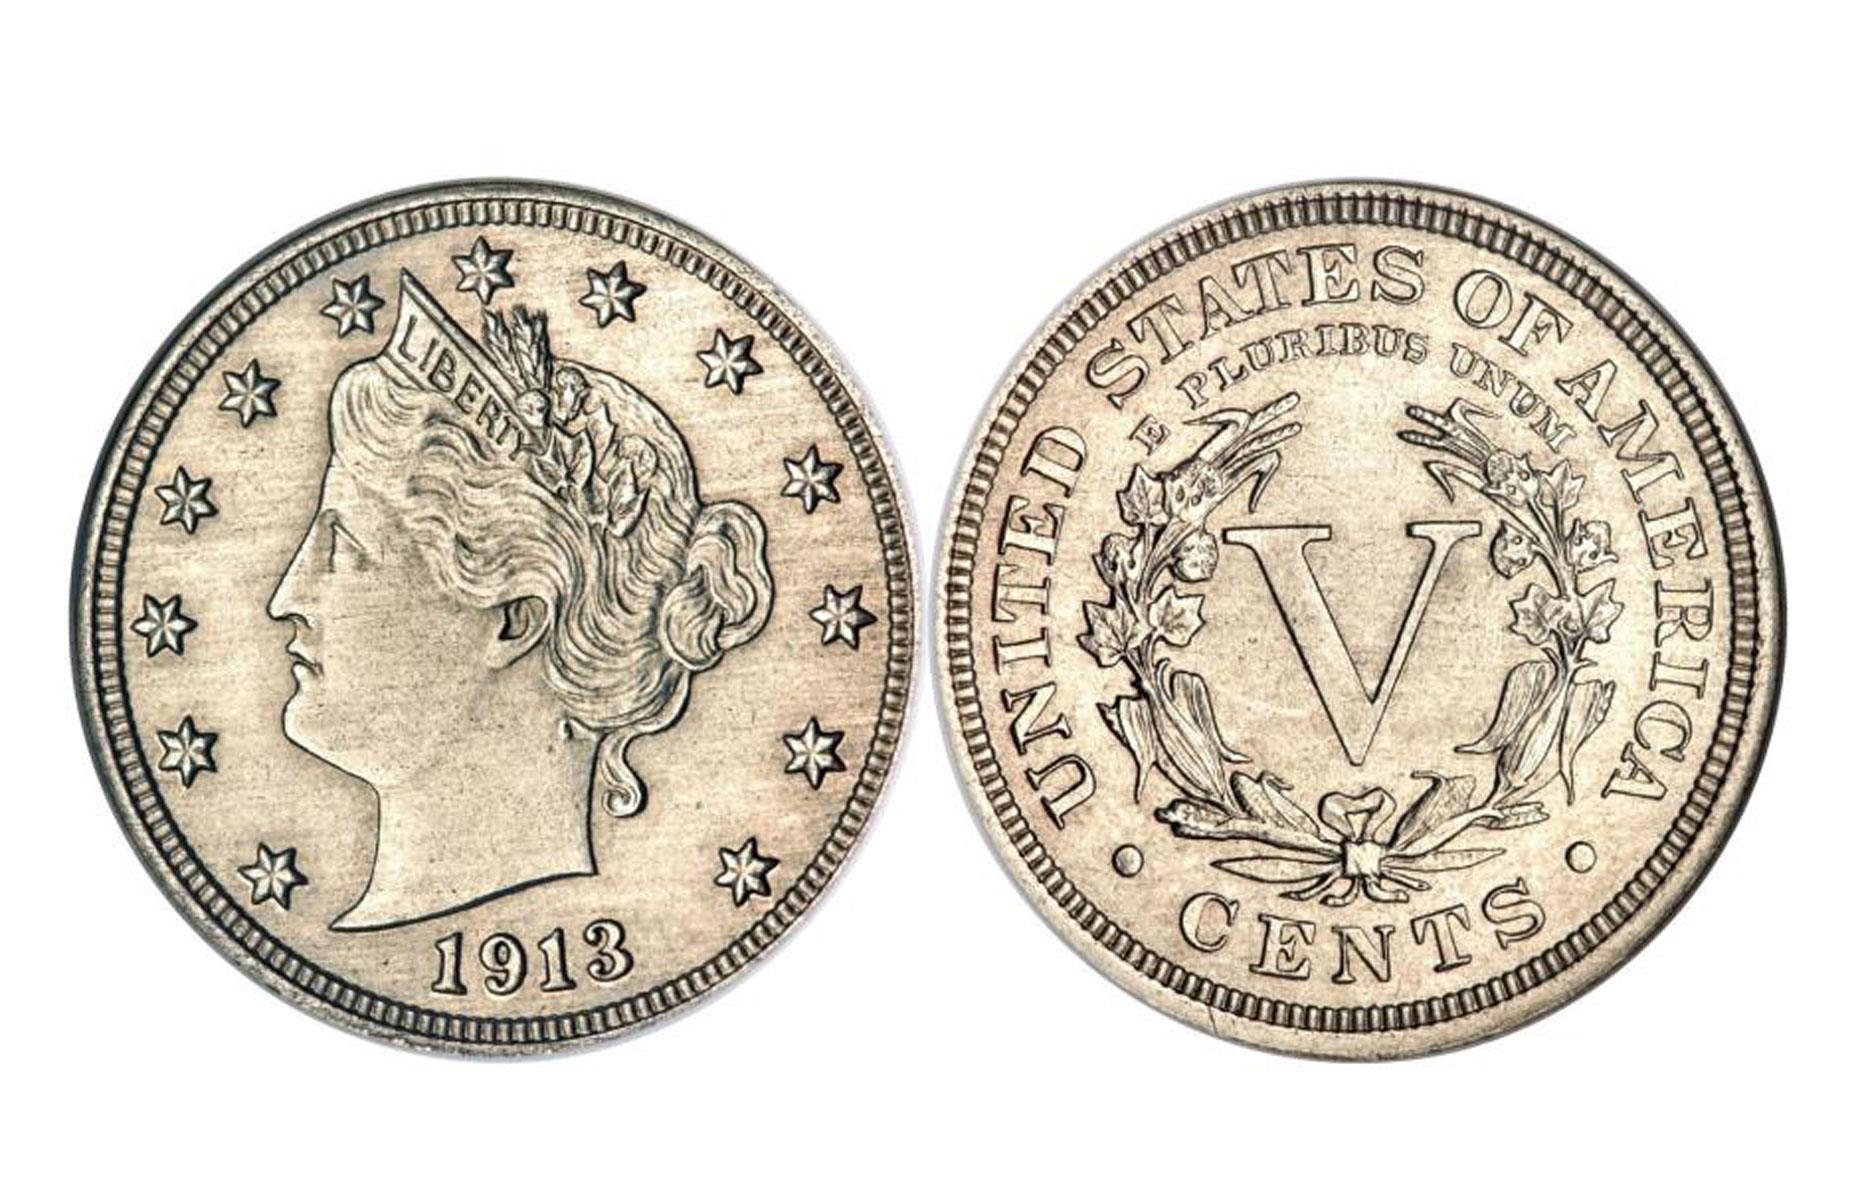 1913 Liberty Head nickel coin: up to $5 million 